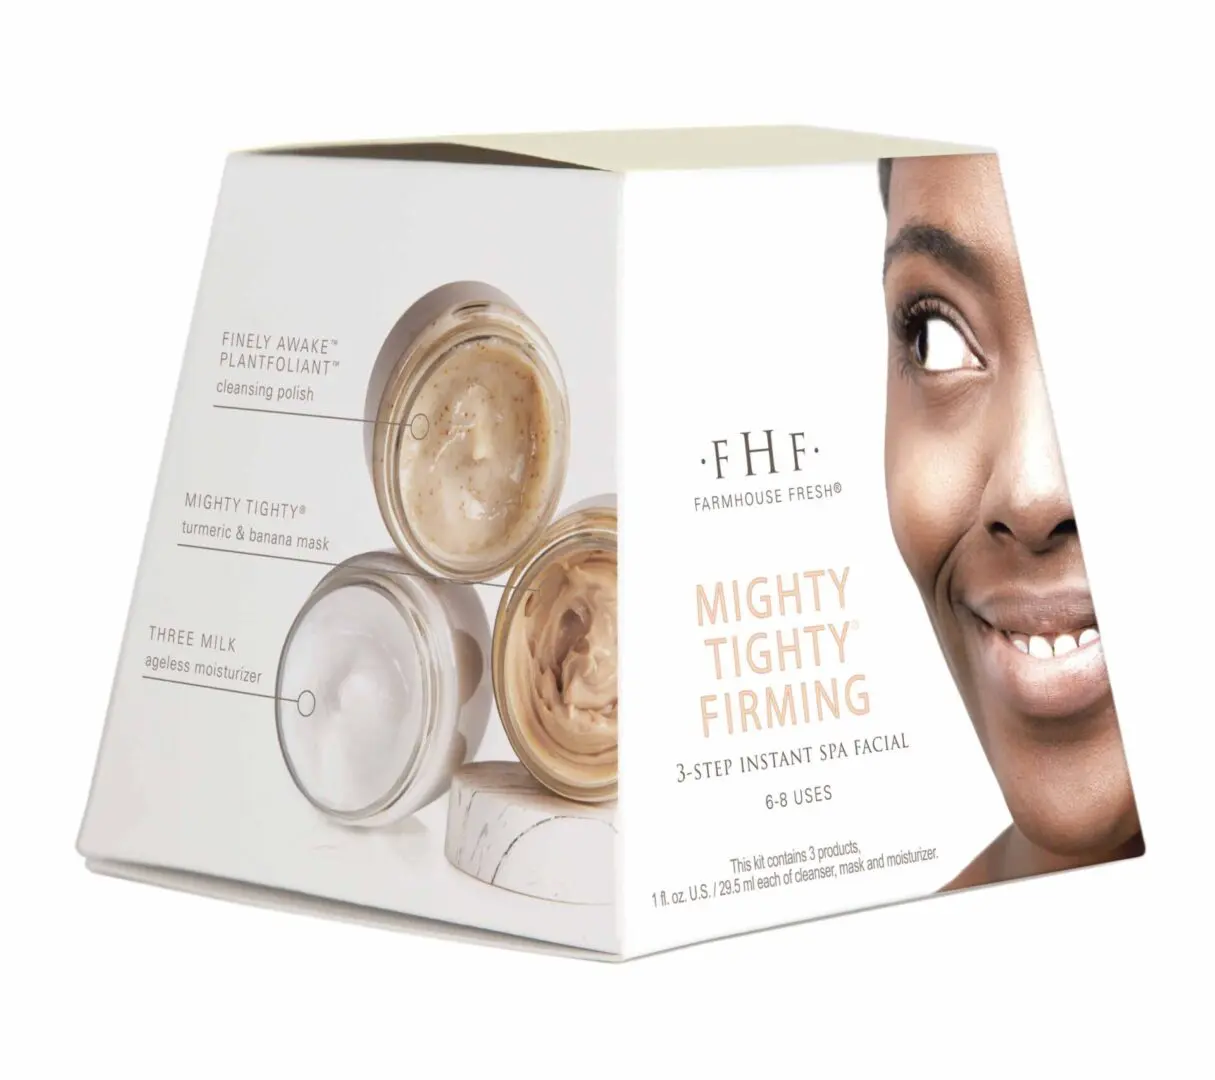 Mighty Tighty Firming 3 Step Instant Spa Facial Fabu Face Spa